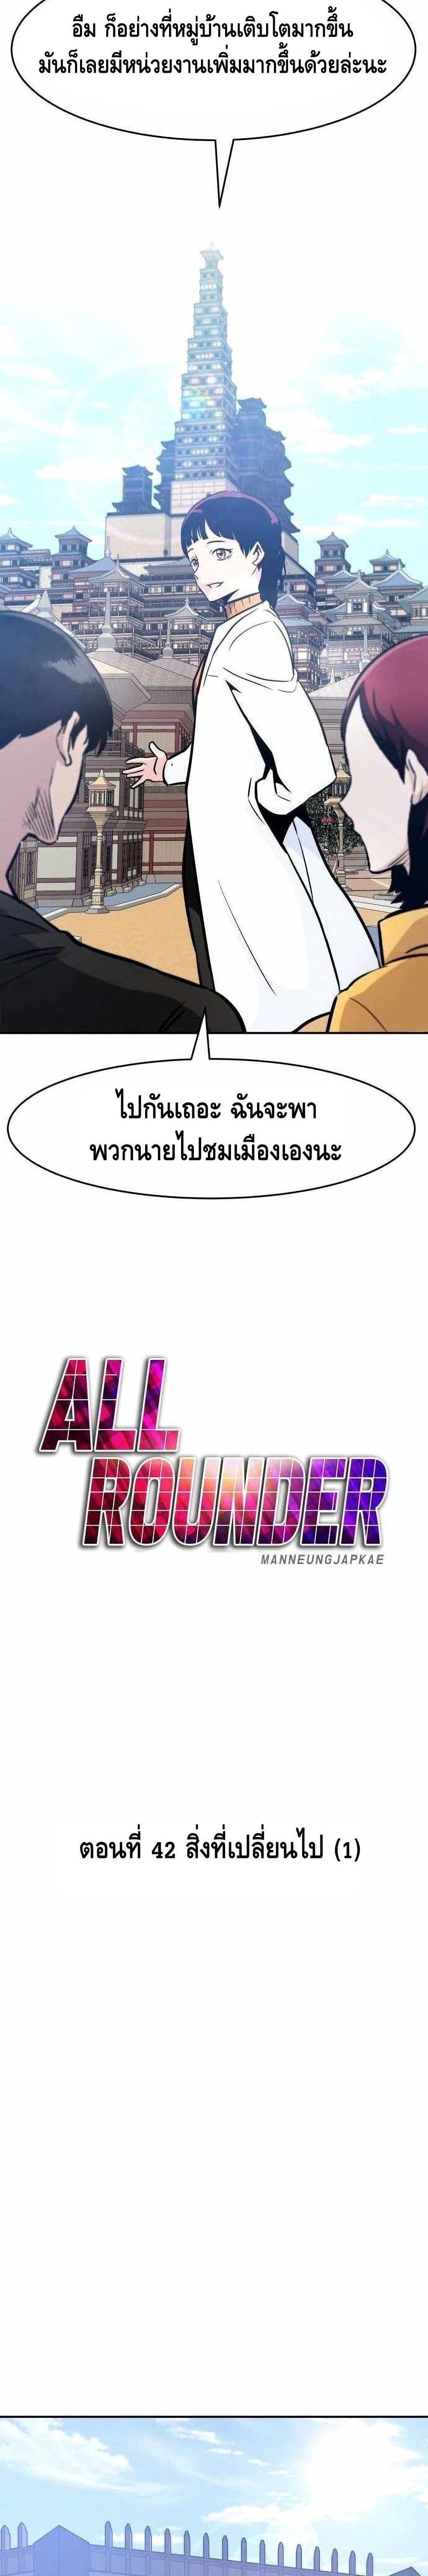 All Rounder 42-42